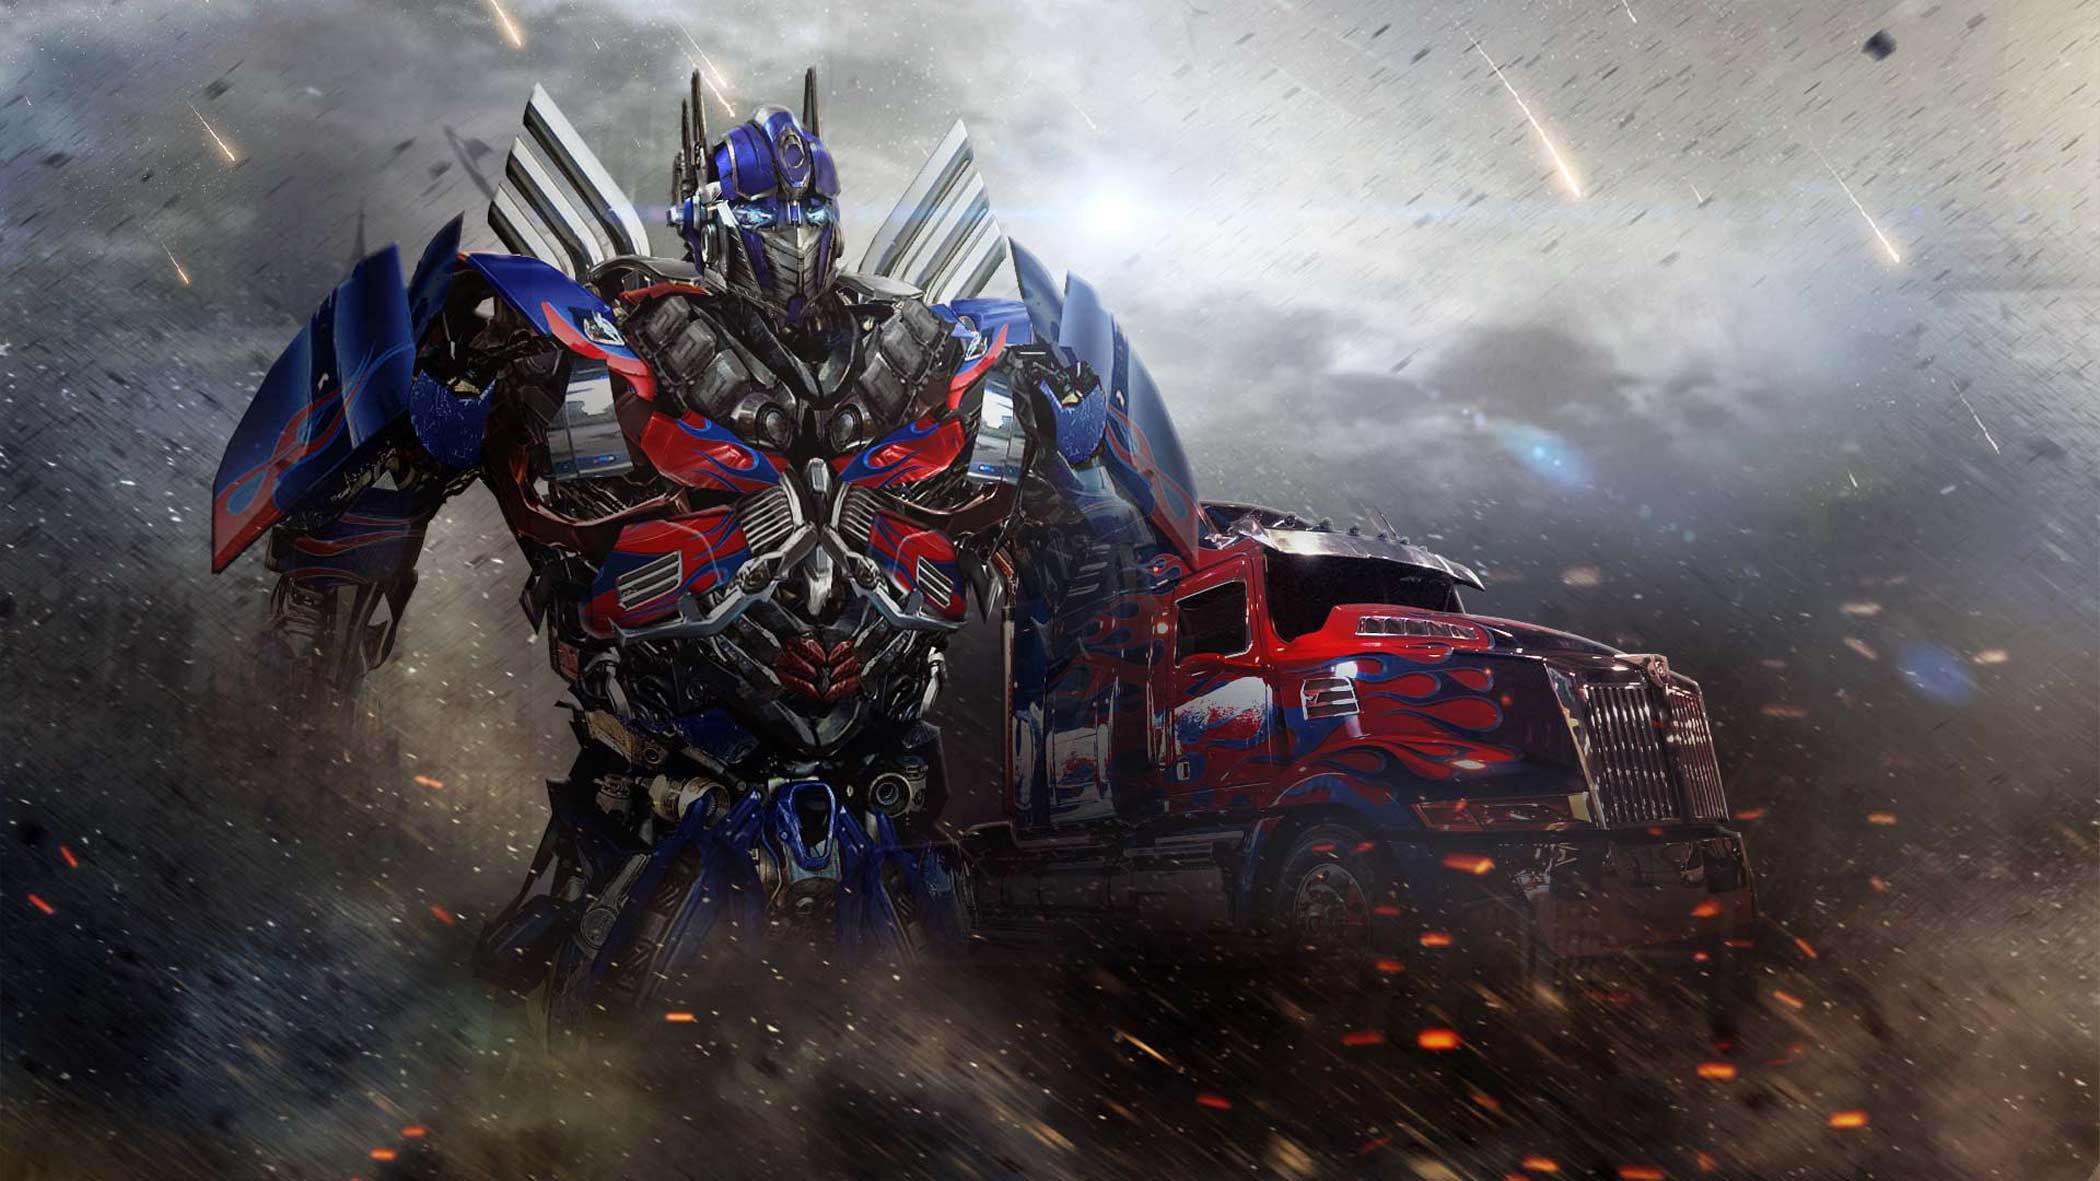 2100x1181 Transformers Wallpapers - Page 1 - HD Wallpapers | Adorable Wallpapers |  Pinterest | Hd wallpaper and Wallpaper